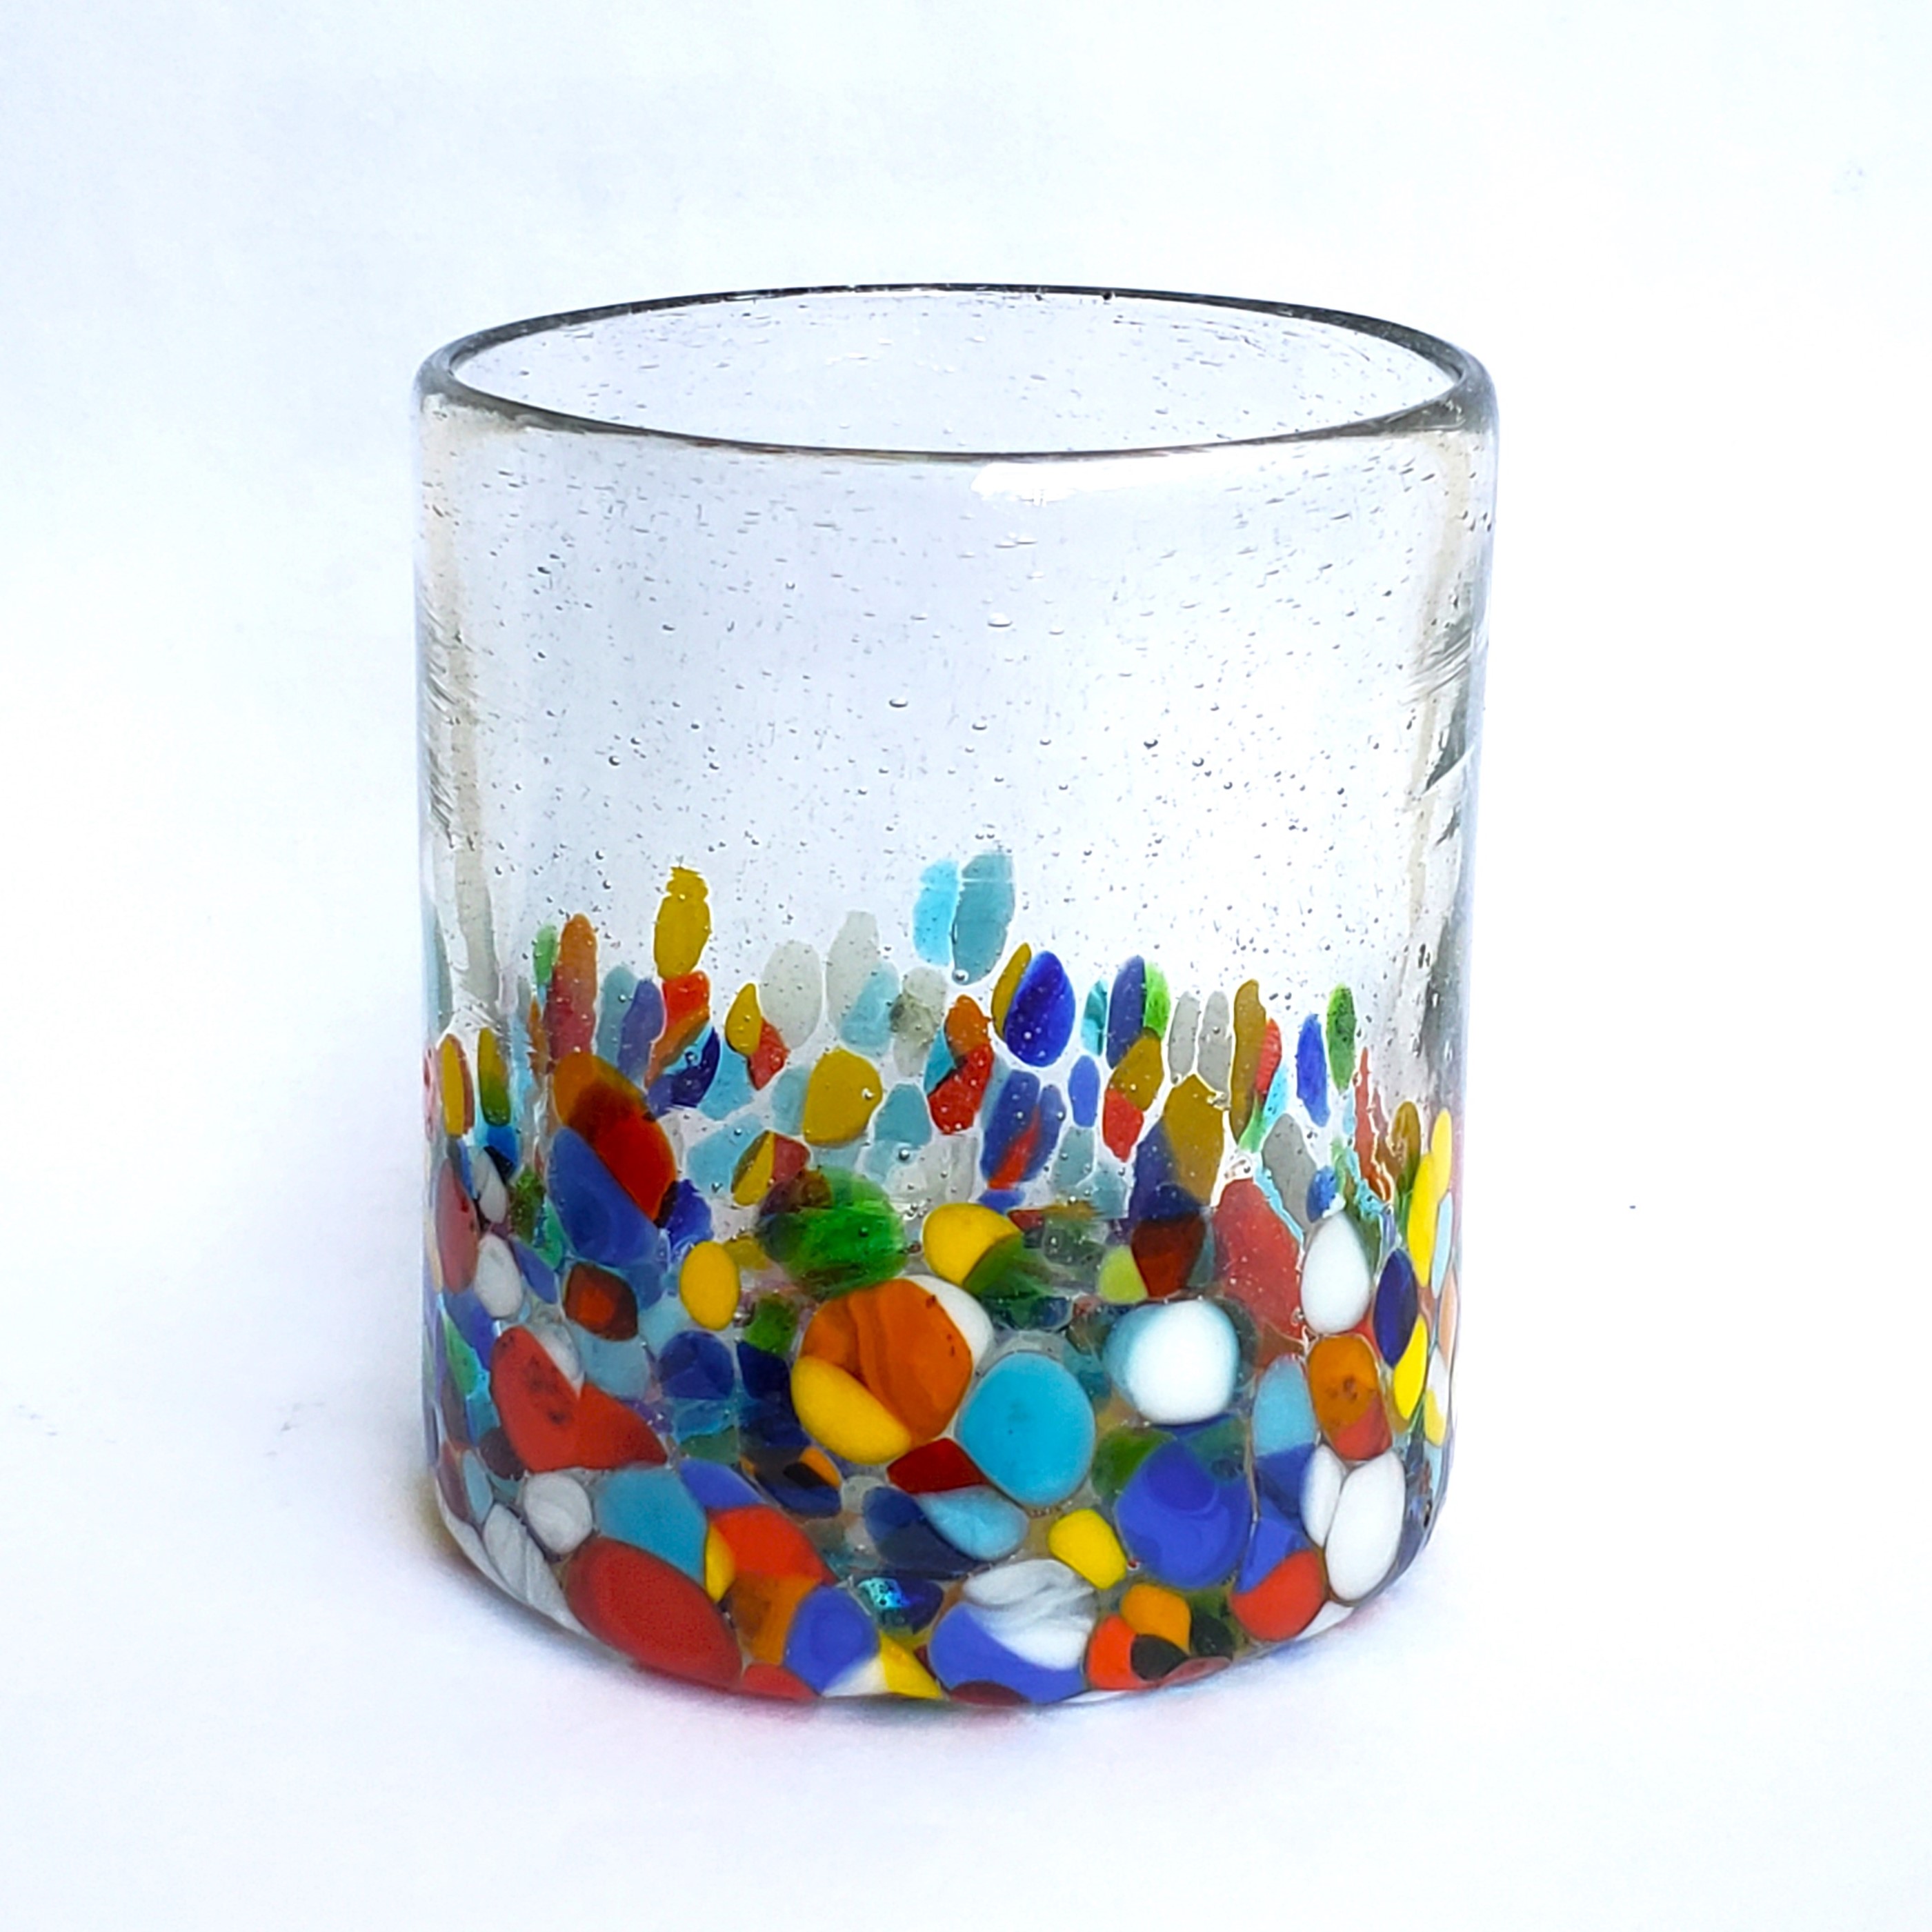 VIDRIO SOPLADO al Mayoreo / fetti 9 oz Short Tumblers (set of 6) / Our Clear & Confetti Glassware combines the best of two worlds: clear, thick, sturdy handcrafted glass on top, meets the colorful, festive, confetti bottom! These glasses will sure be a standout in any table setting or as a fabulous gift for your loved ones. Crafted one by one by skilled artisans in Tonala, Mexico, each glass is different from the next making them unique works of art. You'll be amazed at how they make having a simple glass of water a happier experience. Made from eco-friendly recycled glass.